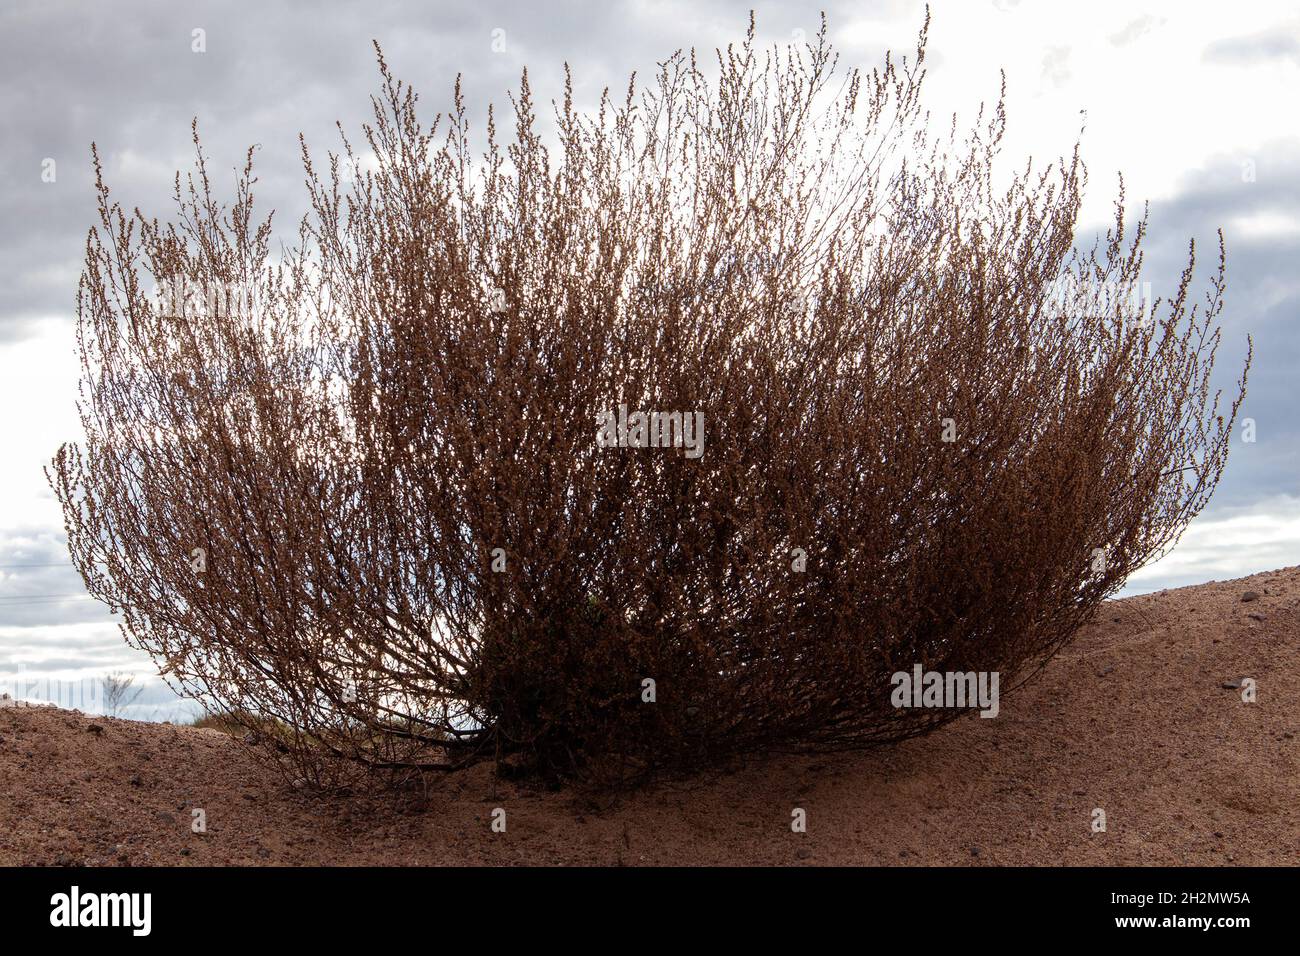 Withered lush bush of steppe plant growing on sandy hill against cloudy sky Stock Photo